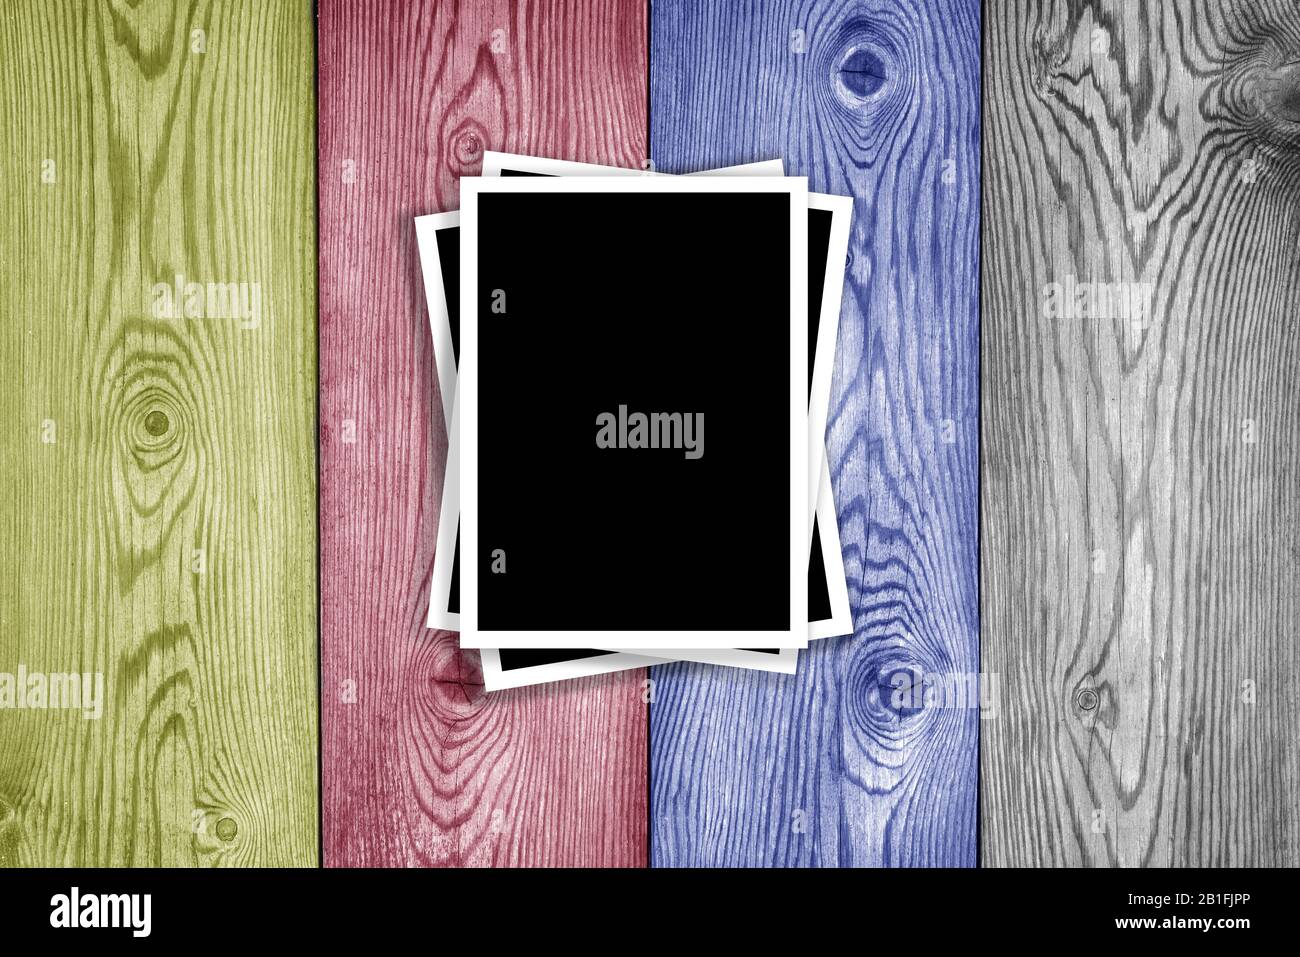 wood multicolor panel with three photos Stock Photo